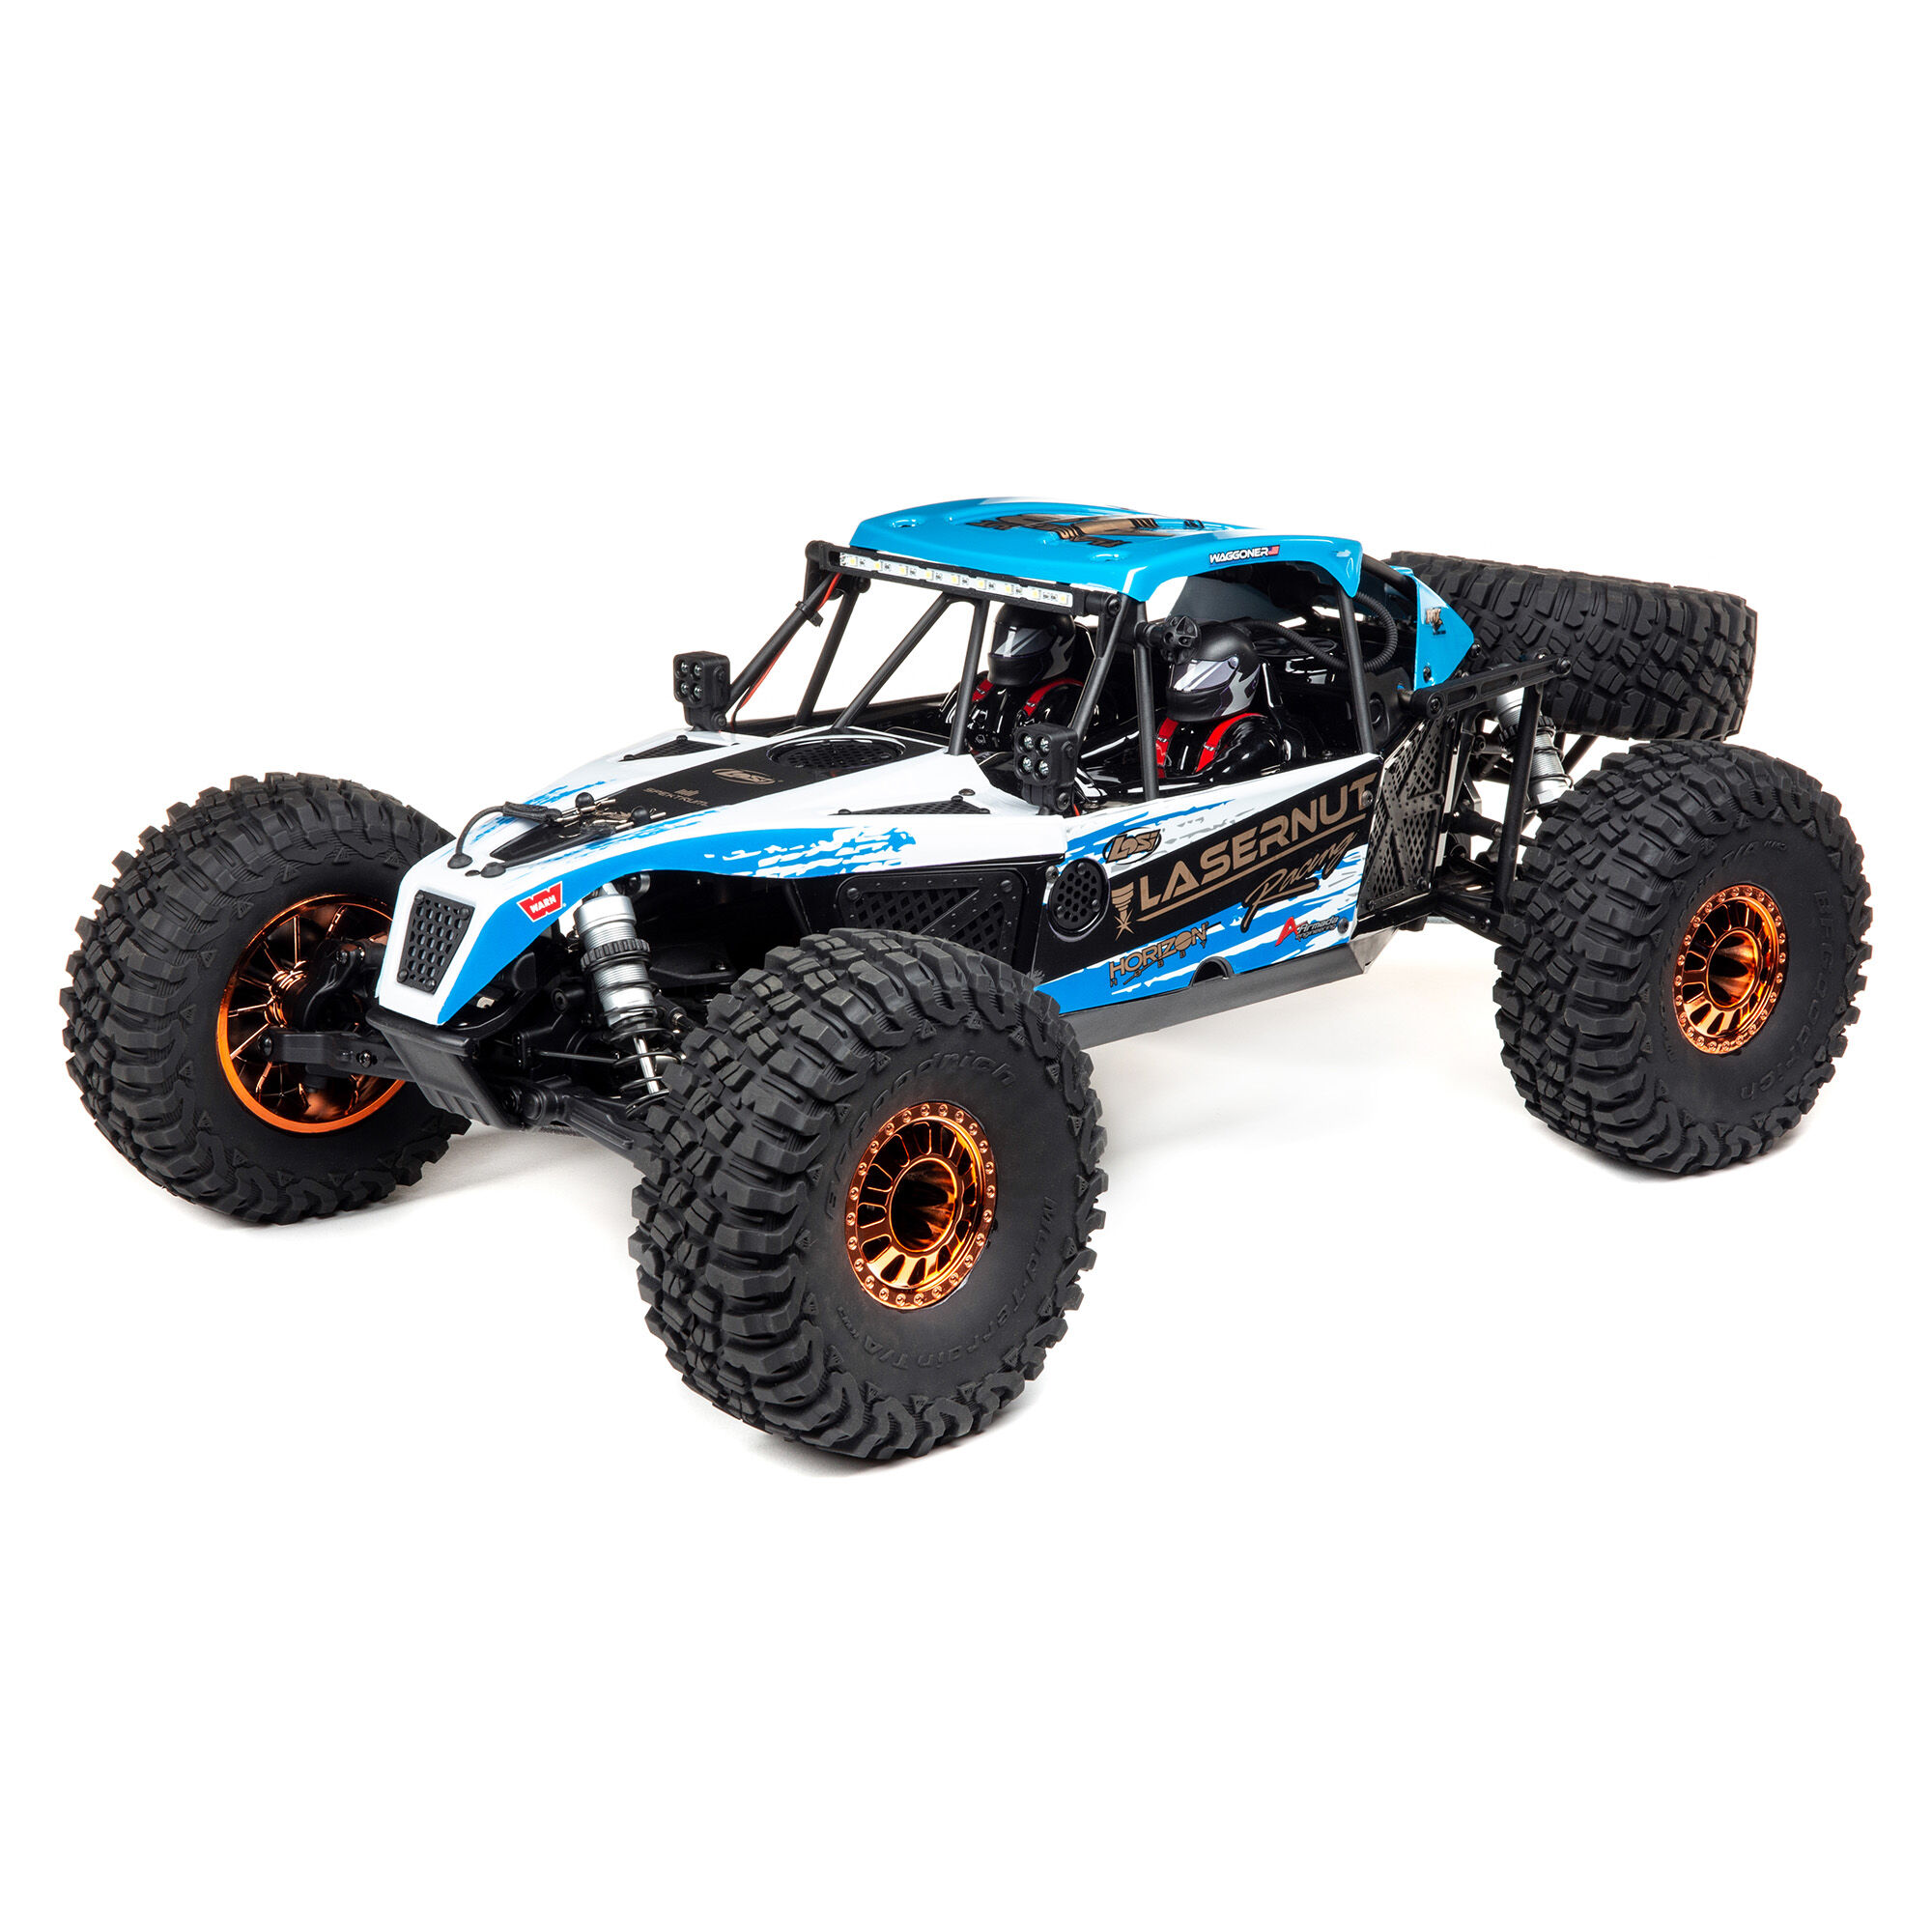 2wd Rc Dune Desert Buggy Red Demaxis Offroad RTR Rc Electric Cars Rc All Terrain Vehicles truggy 1/16 Scale Highest Speed 10 mph Rechargeable 2.4 g Radio Remote Control Trucks 